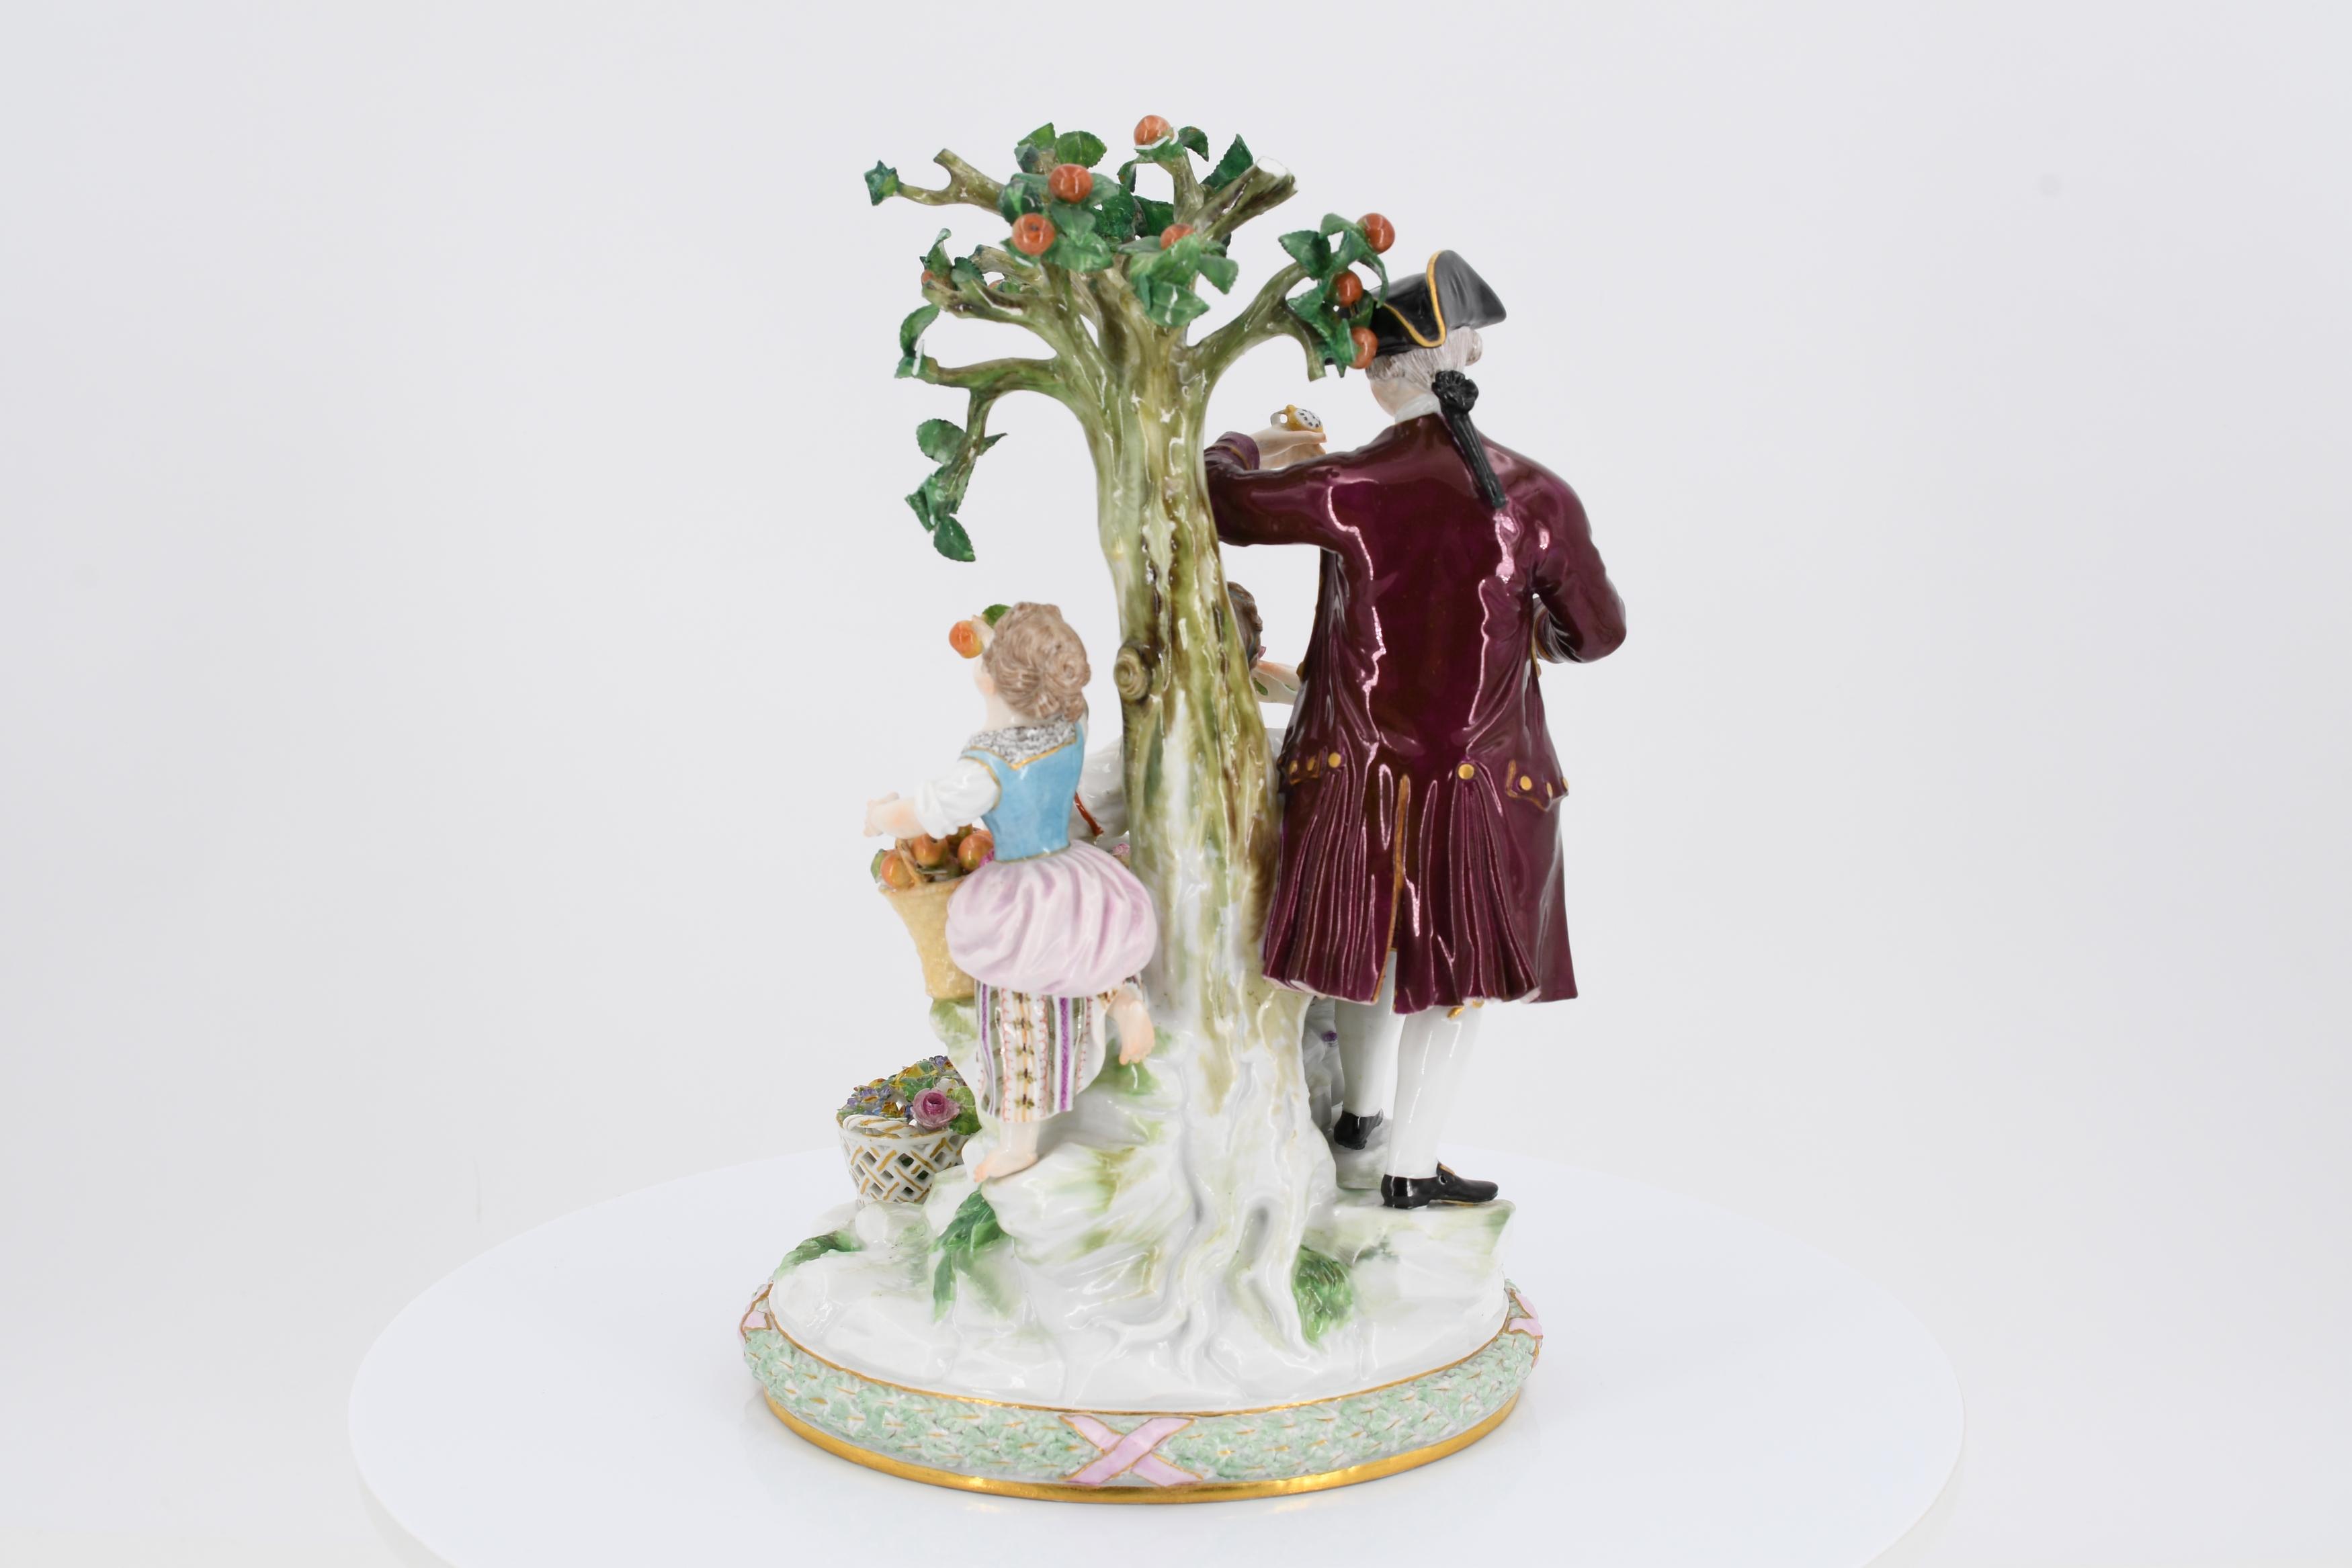 Porcelain ensemble of gardeners with an apple tree - Image 4 of 6